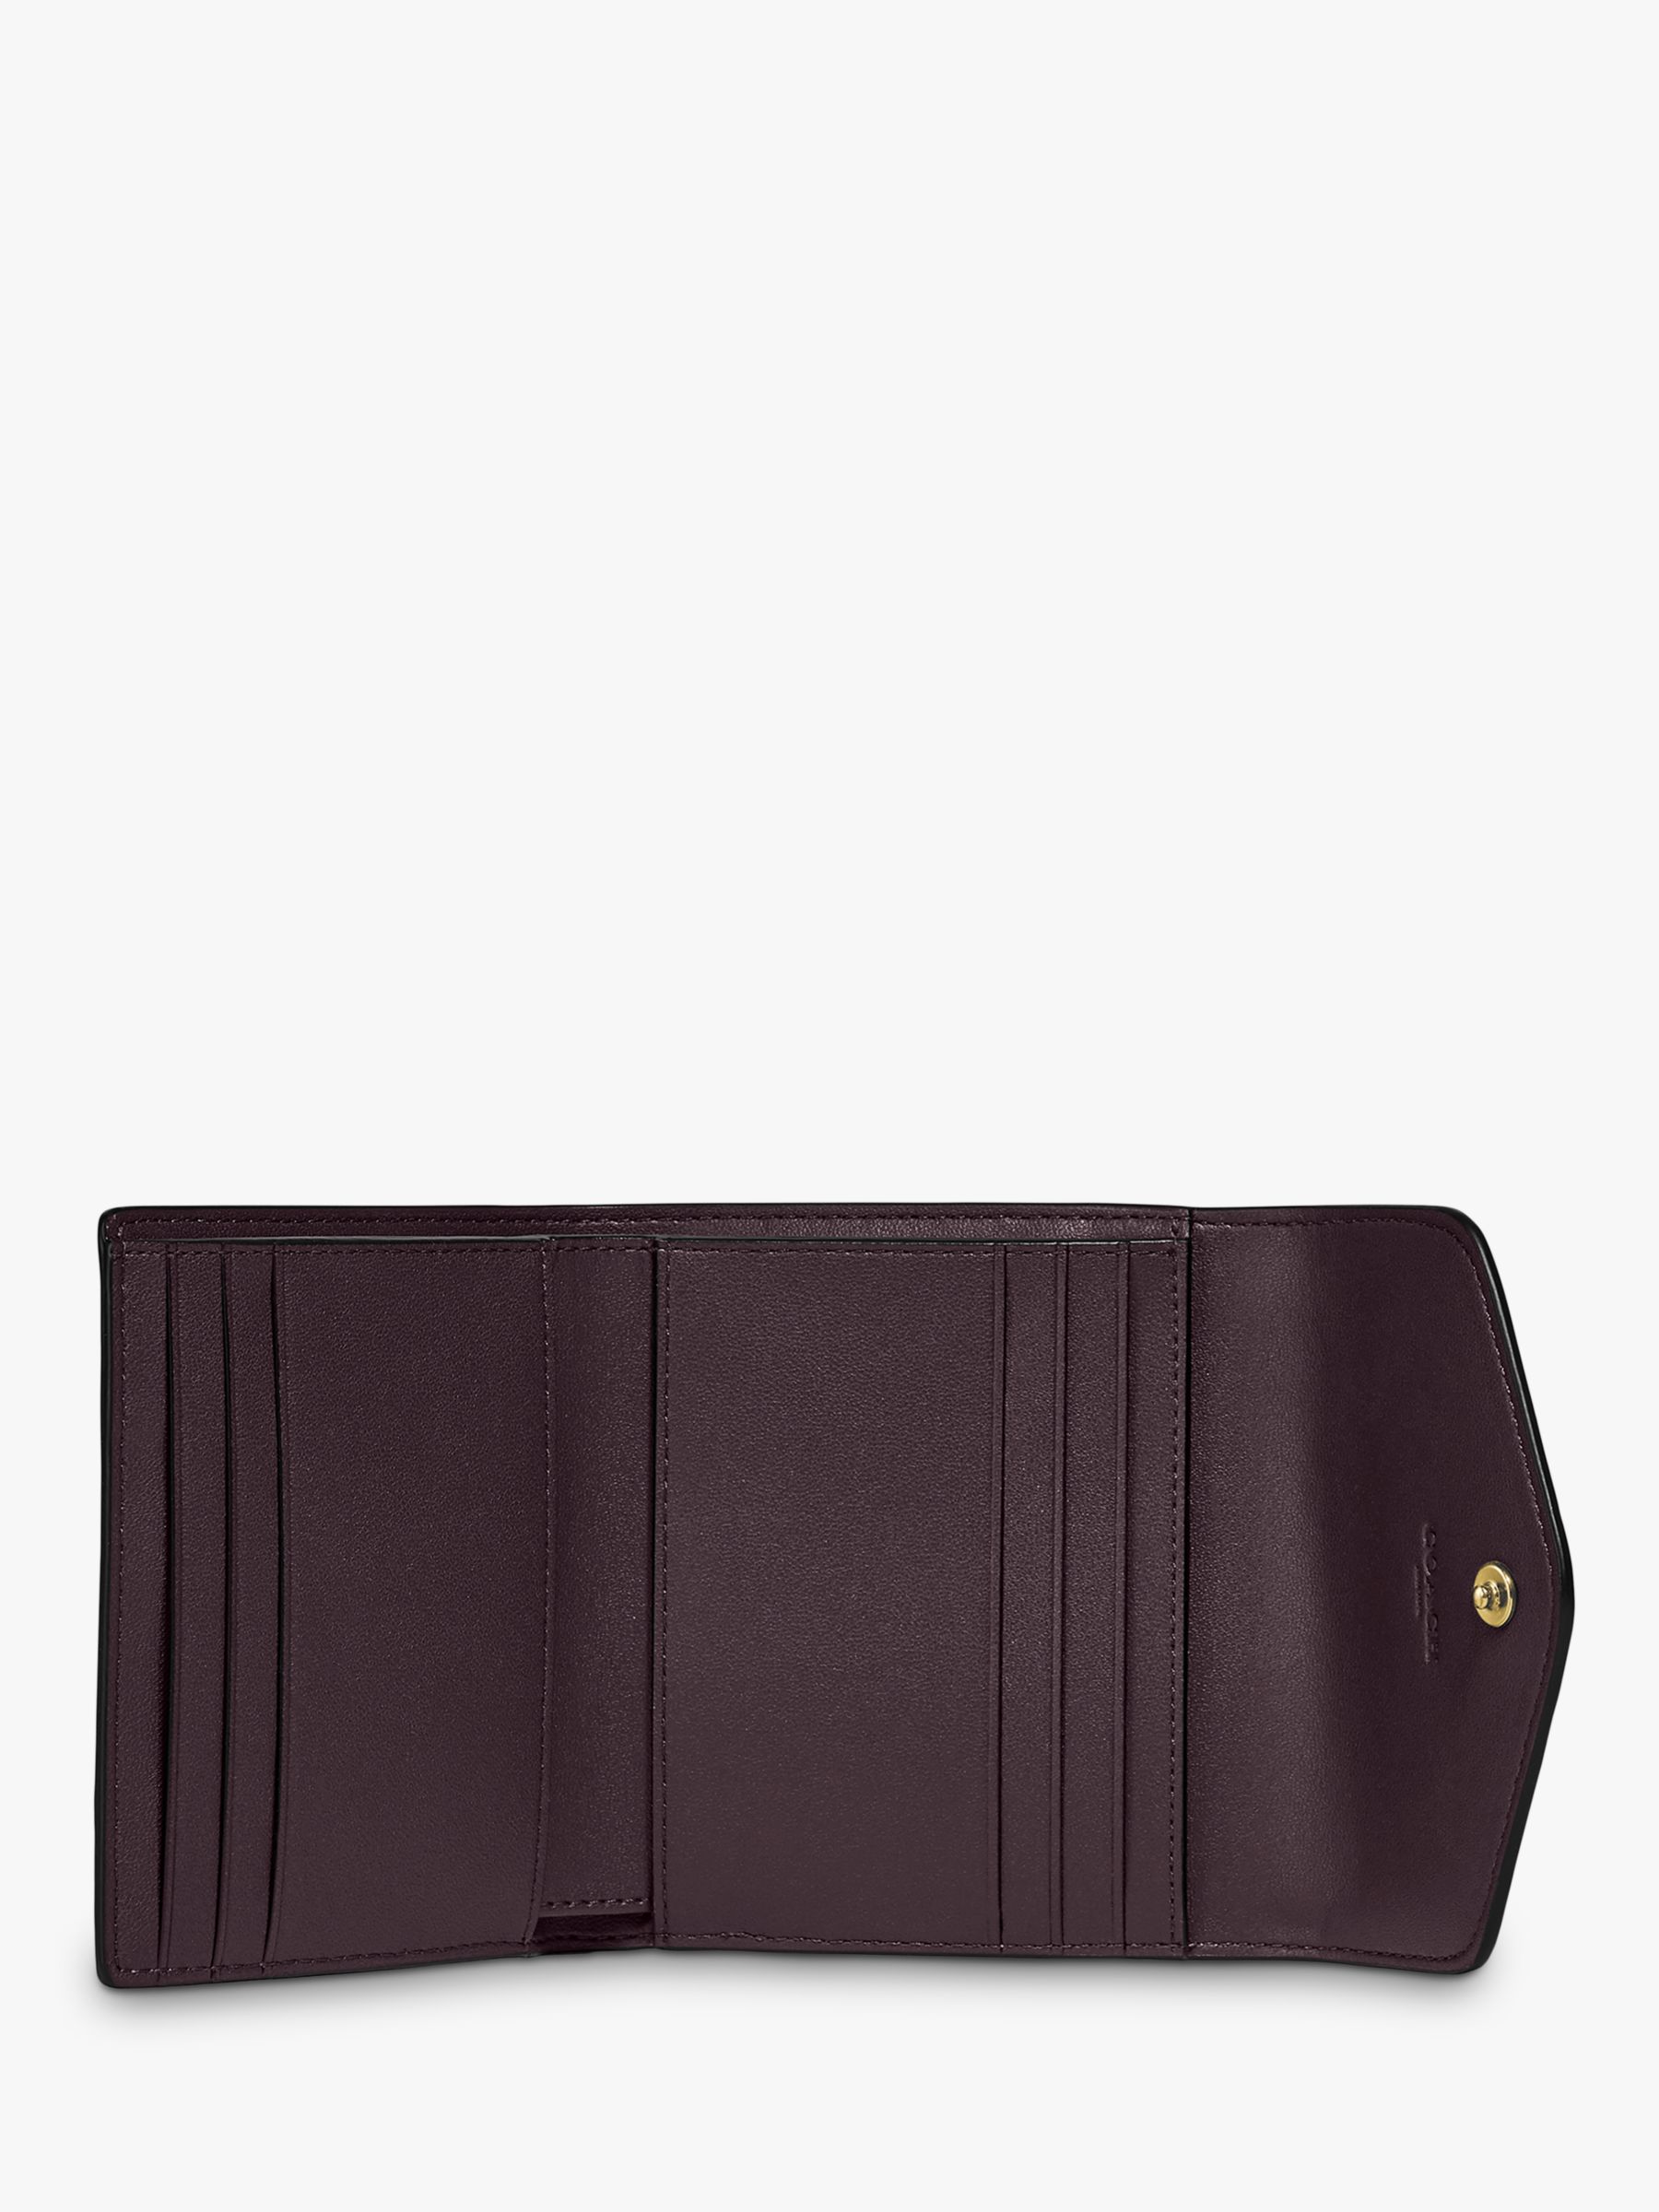 Buy Coach Wyn Small Leather Envelope Purse Online at johnlewis.com